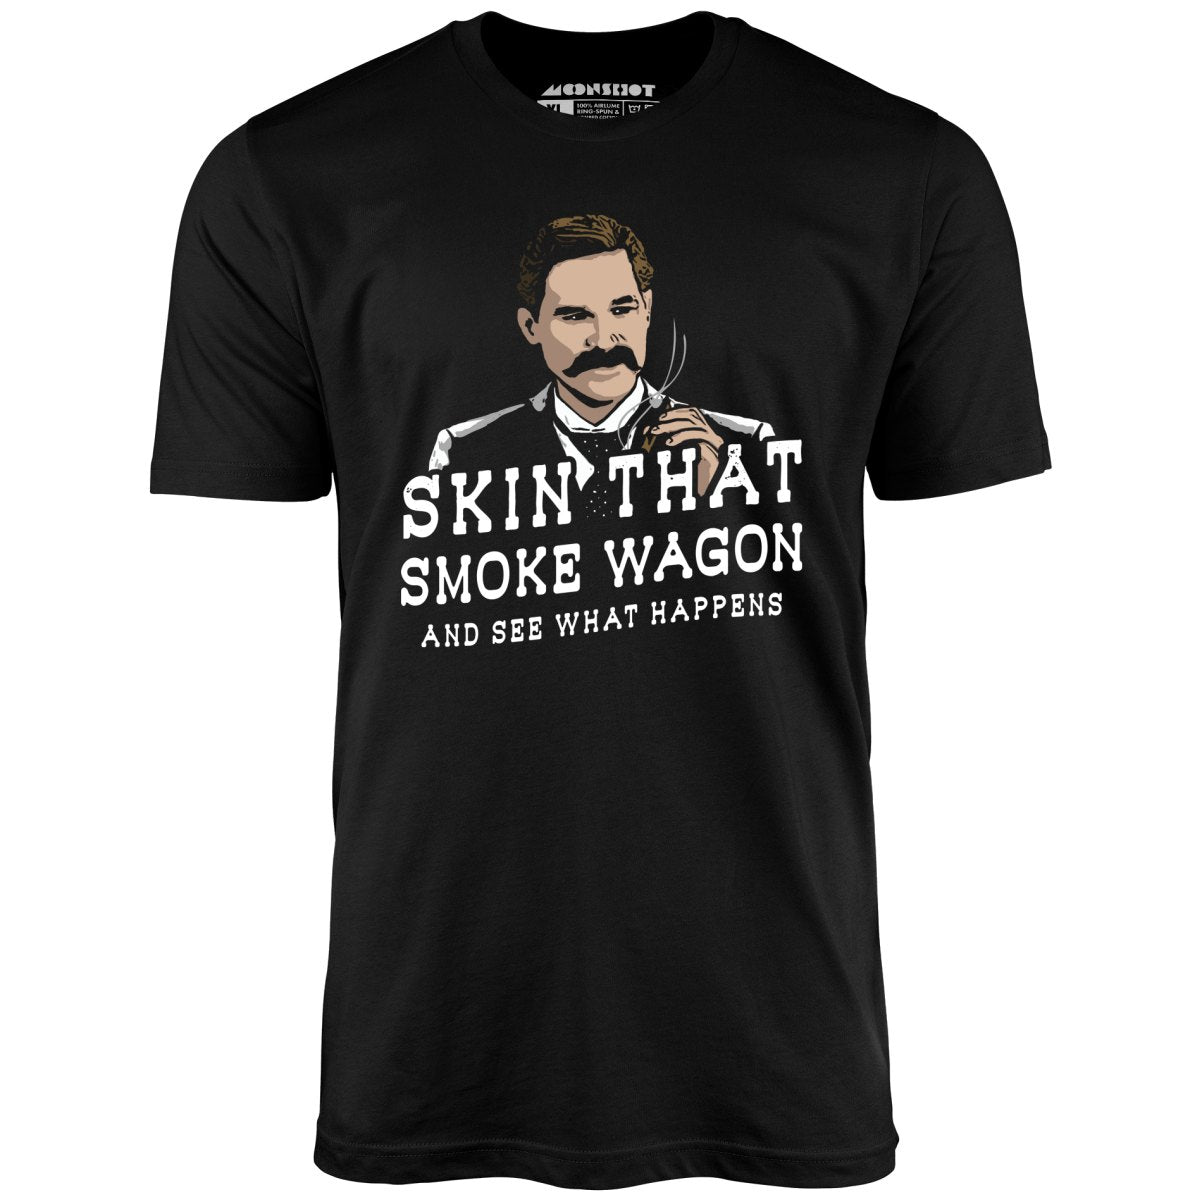 Skin That Smoke Wagon and See What Happens - Unisex T-Shirt